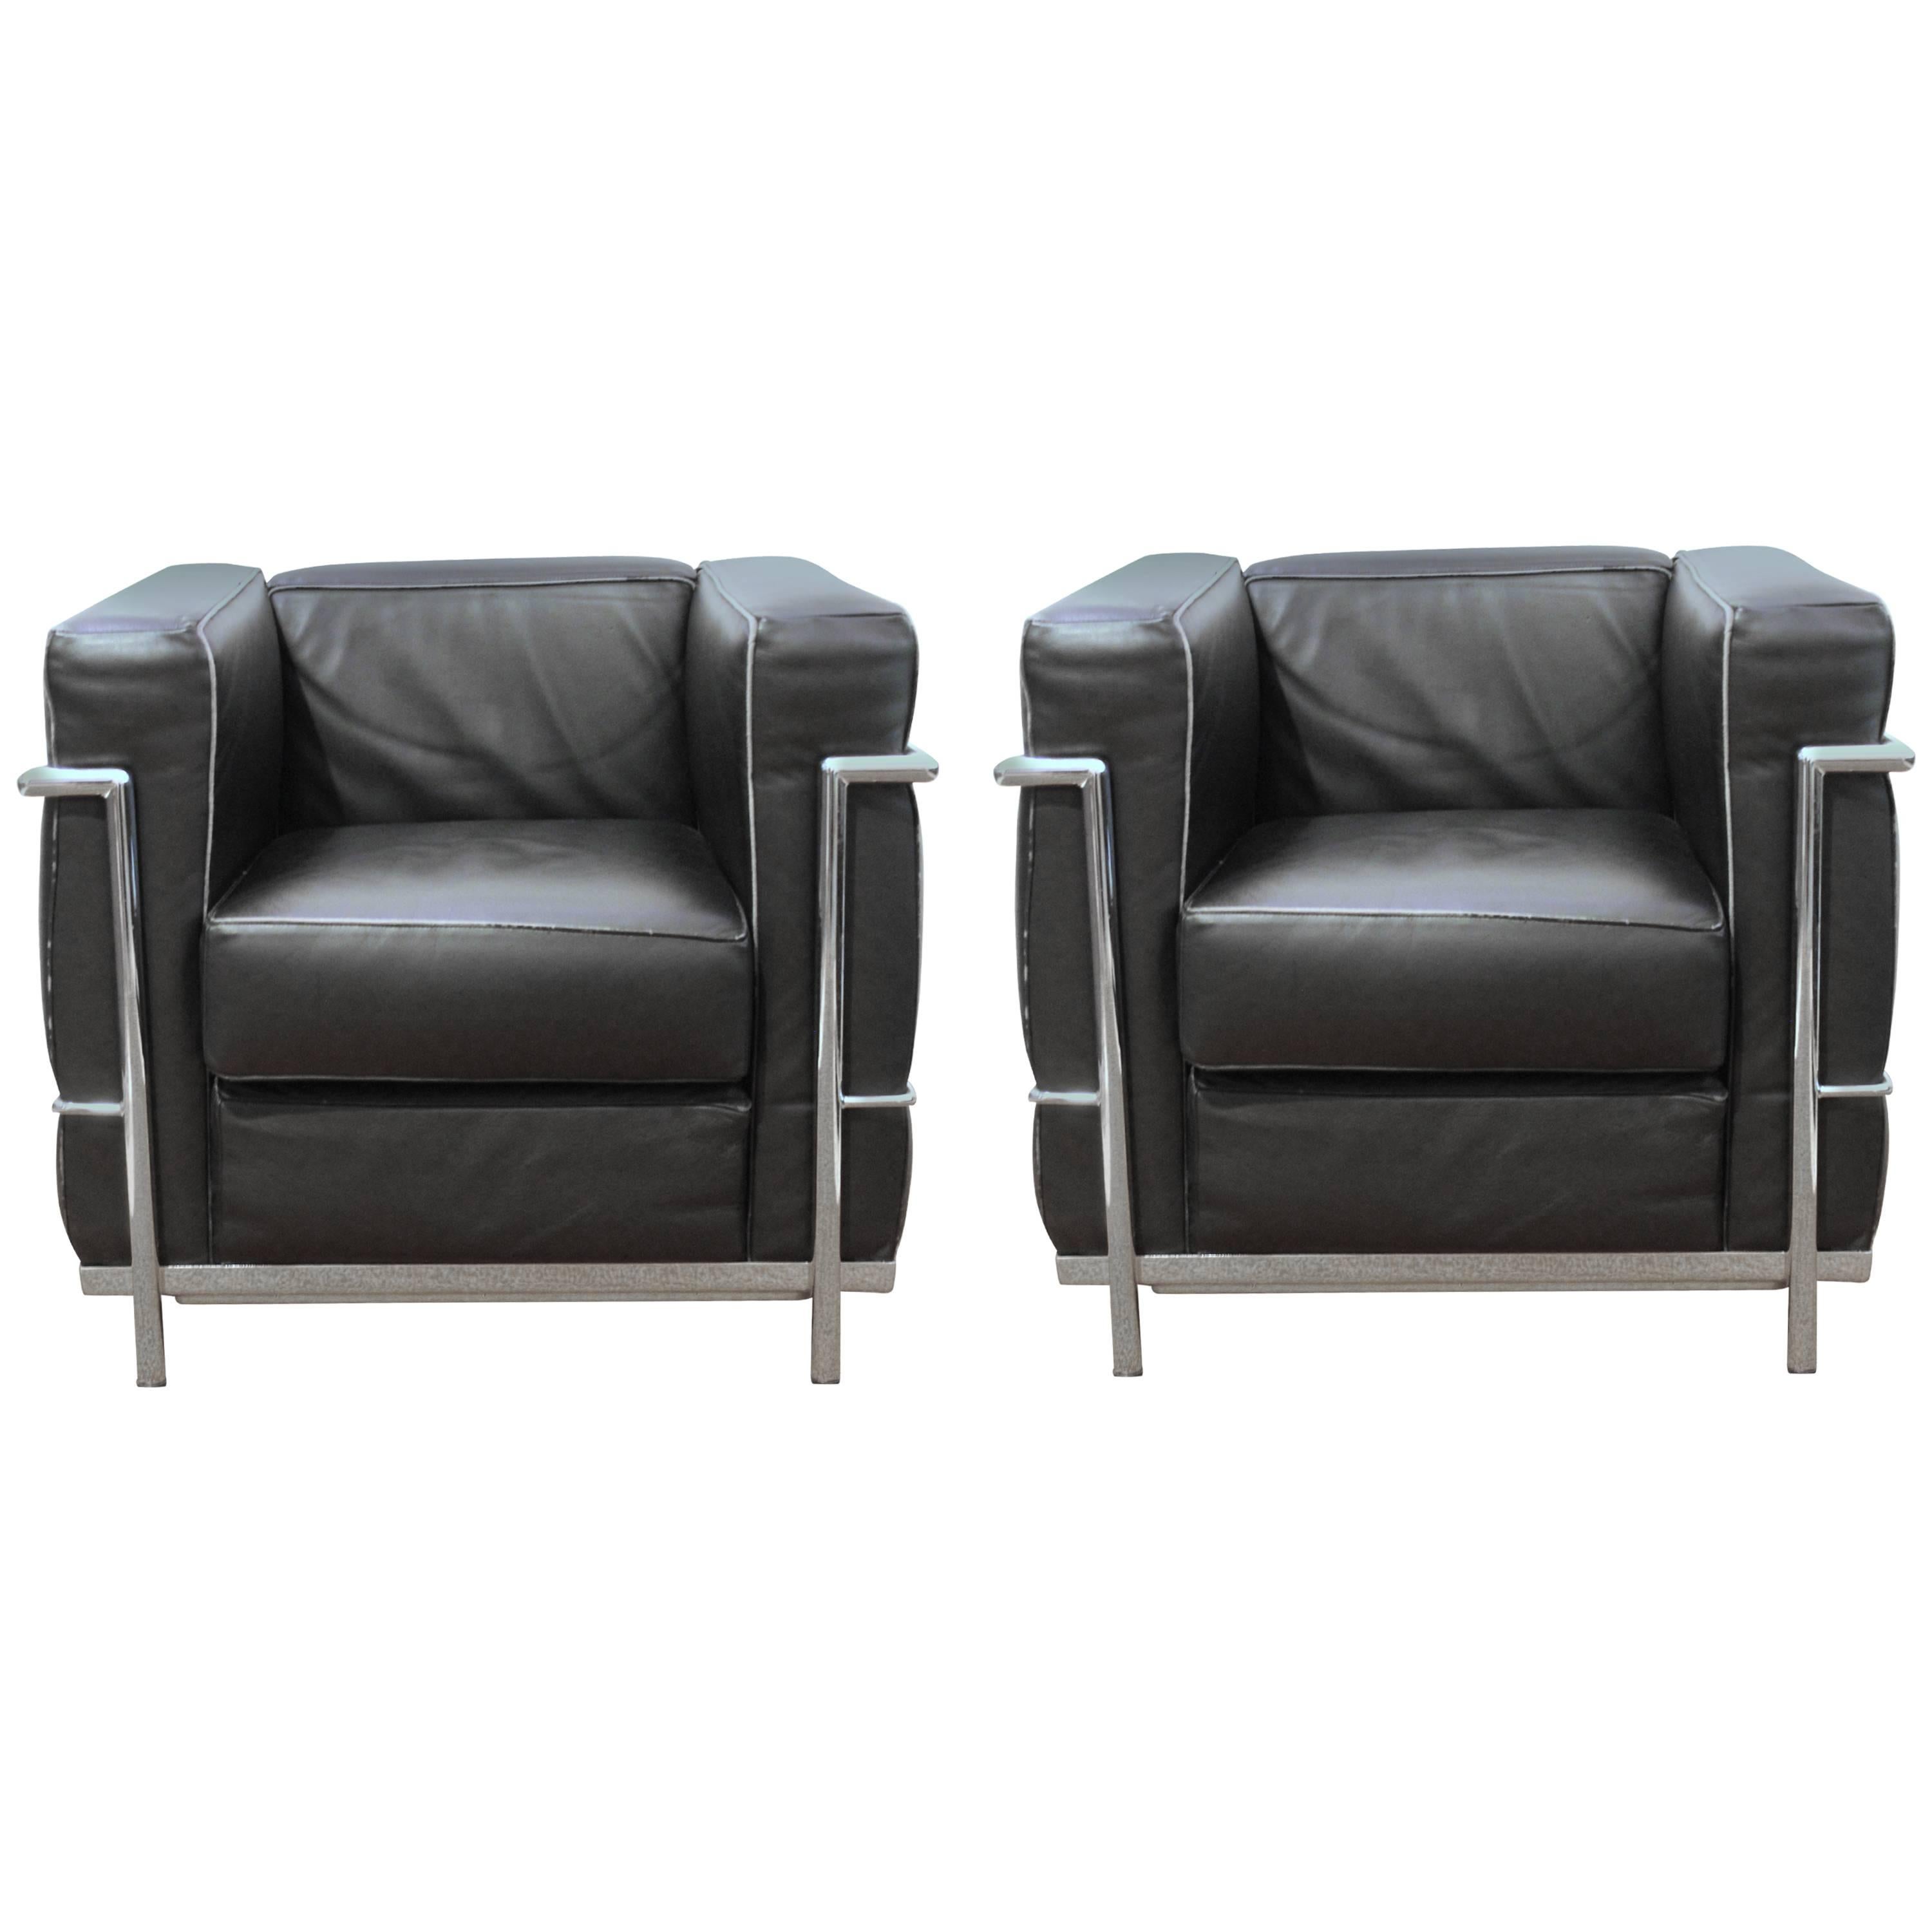 Pair of LC2 Armchairs by Le Corbusier for Alivar